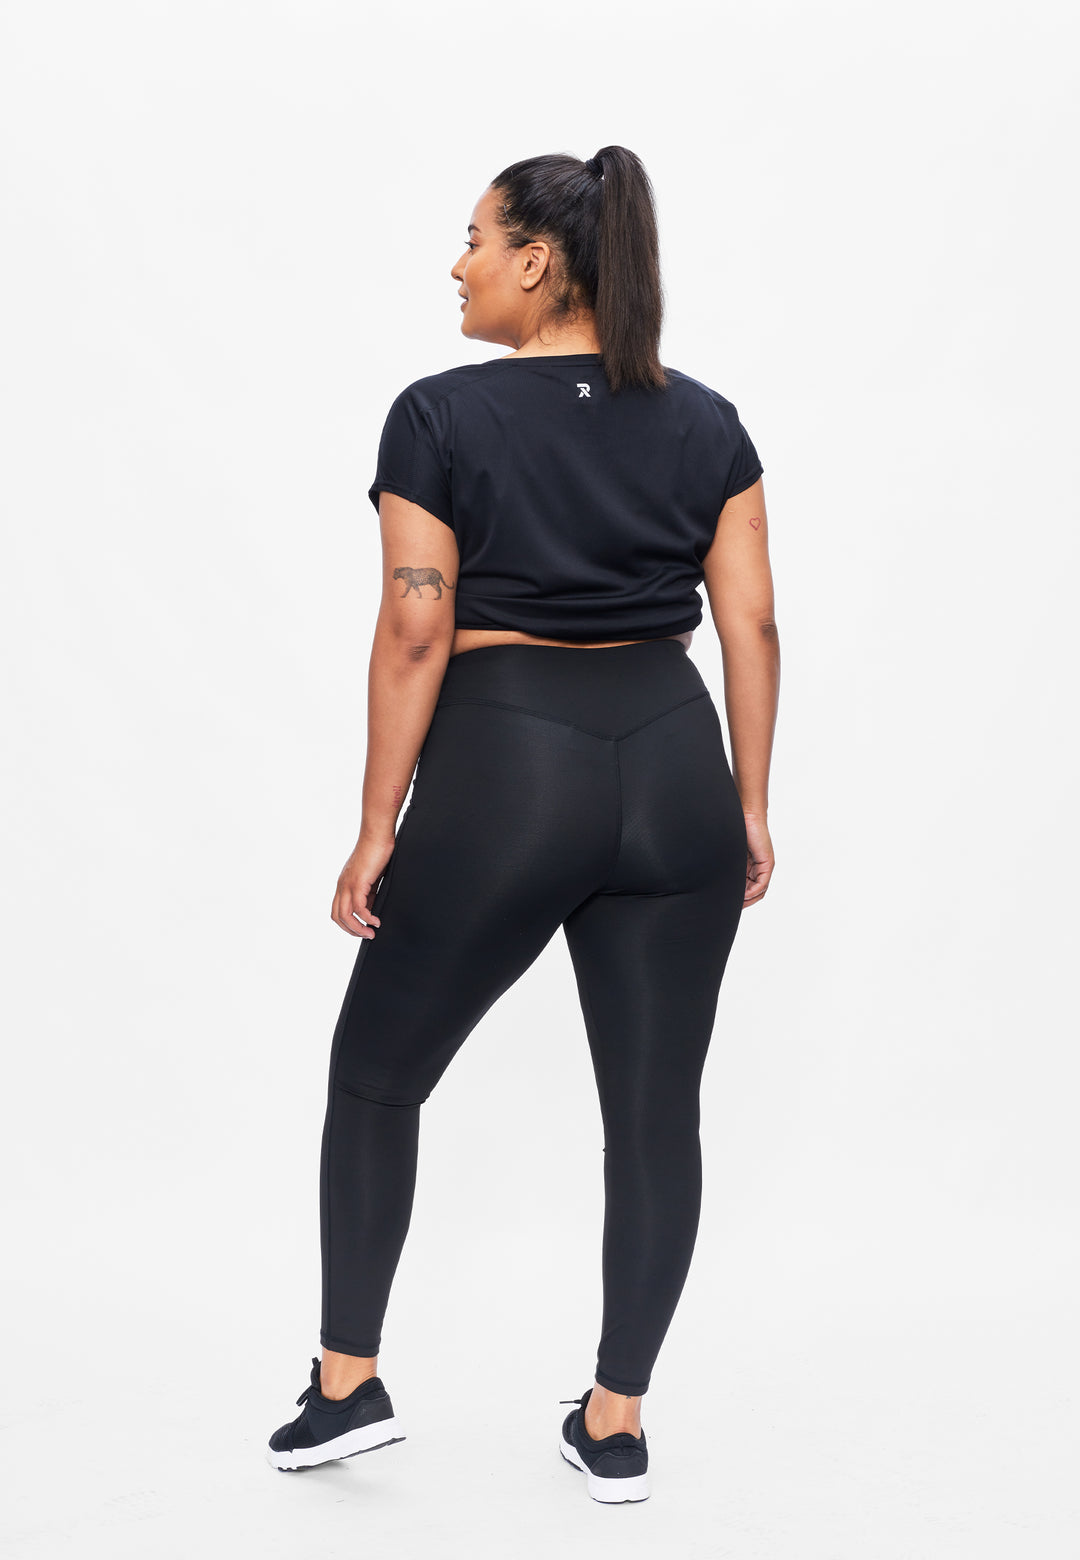 Women's sports legging Dry-Cool - sustainable Plus size